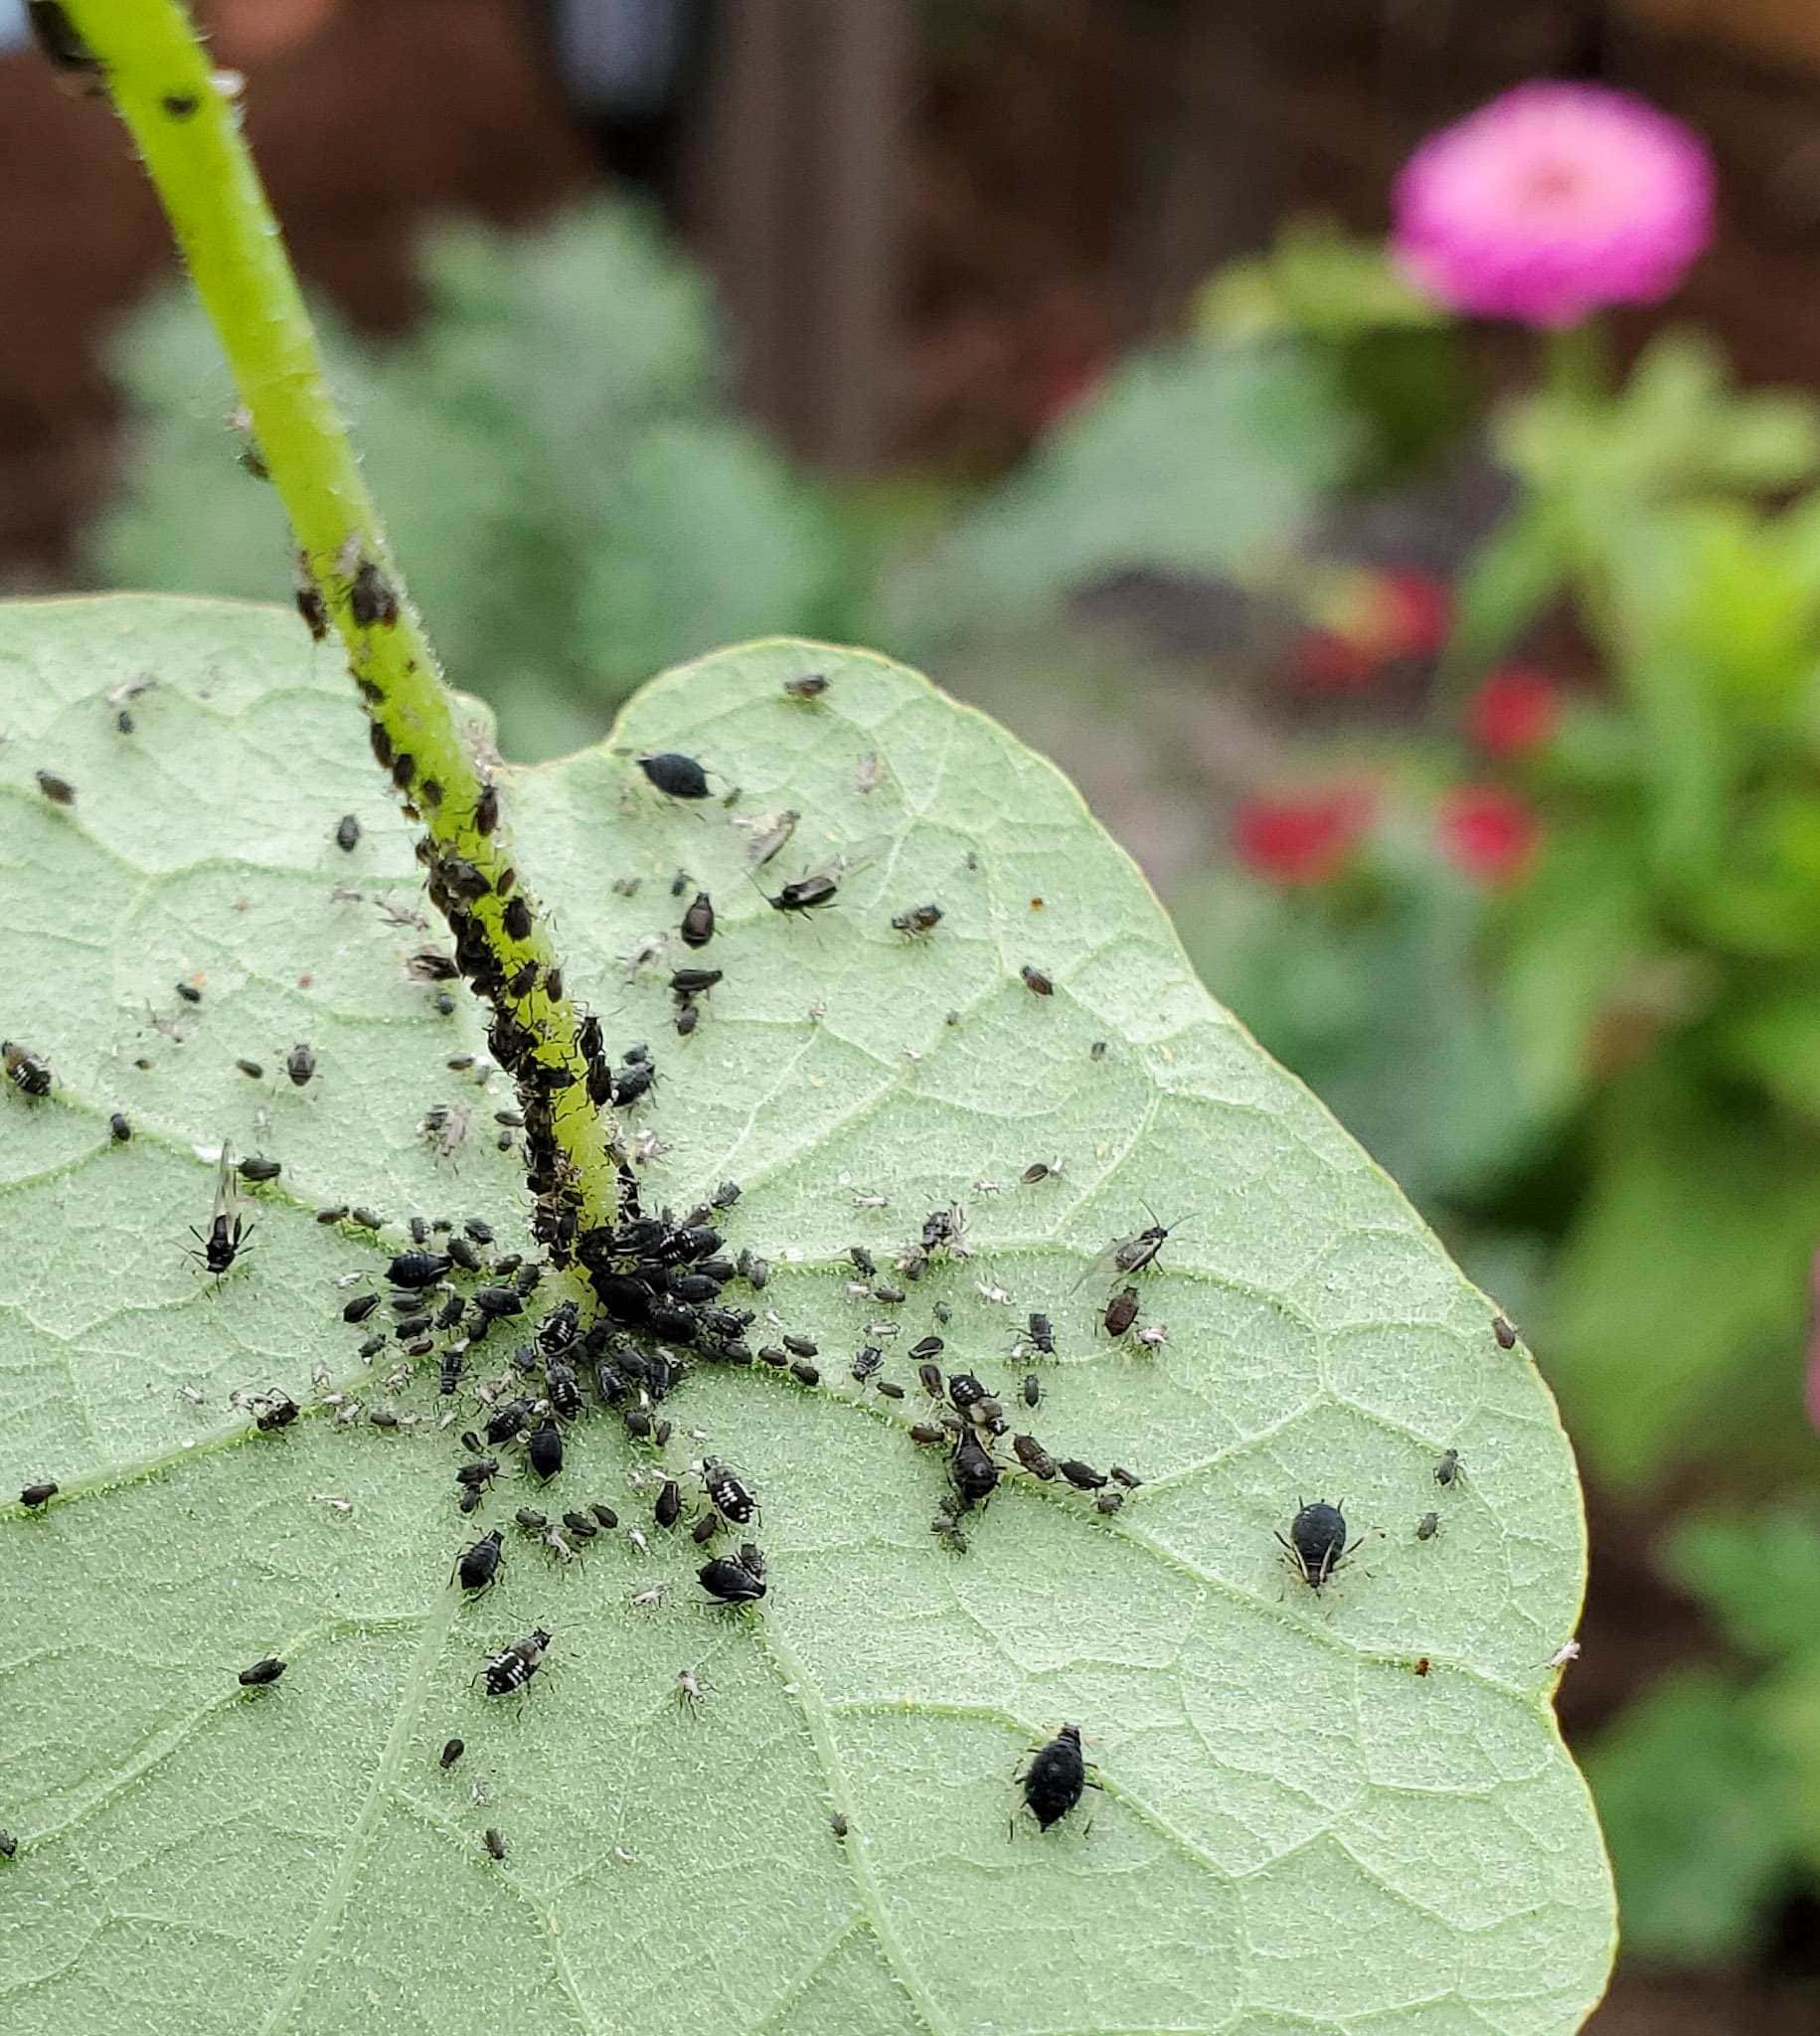 The underside of a nasturtium leaf is shown, it is partially covered with many black aphids of varying sizes. Some of the larger aphids have wings, planting trap plants such as nasturtium is a great way to get rid of aphids. 